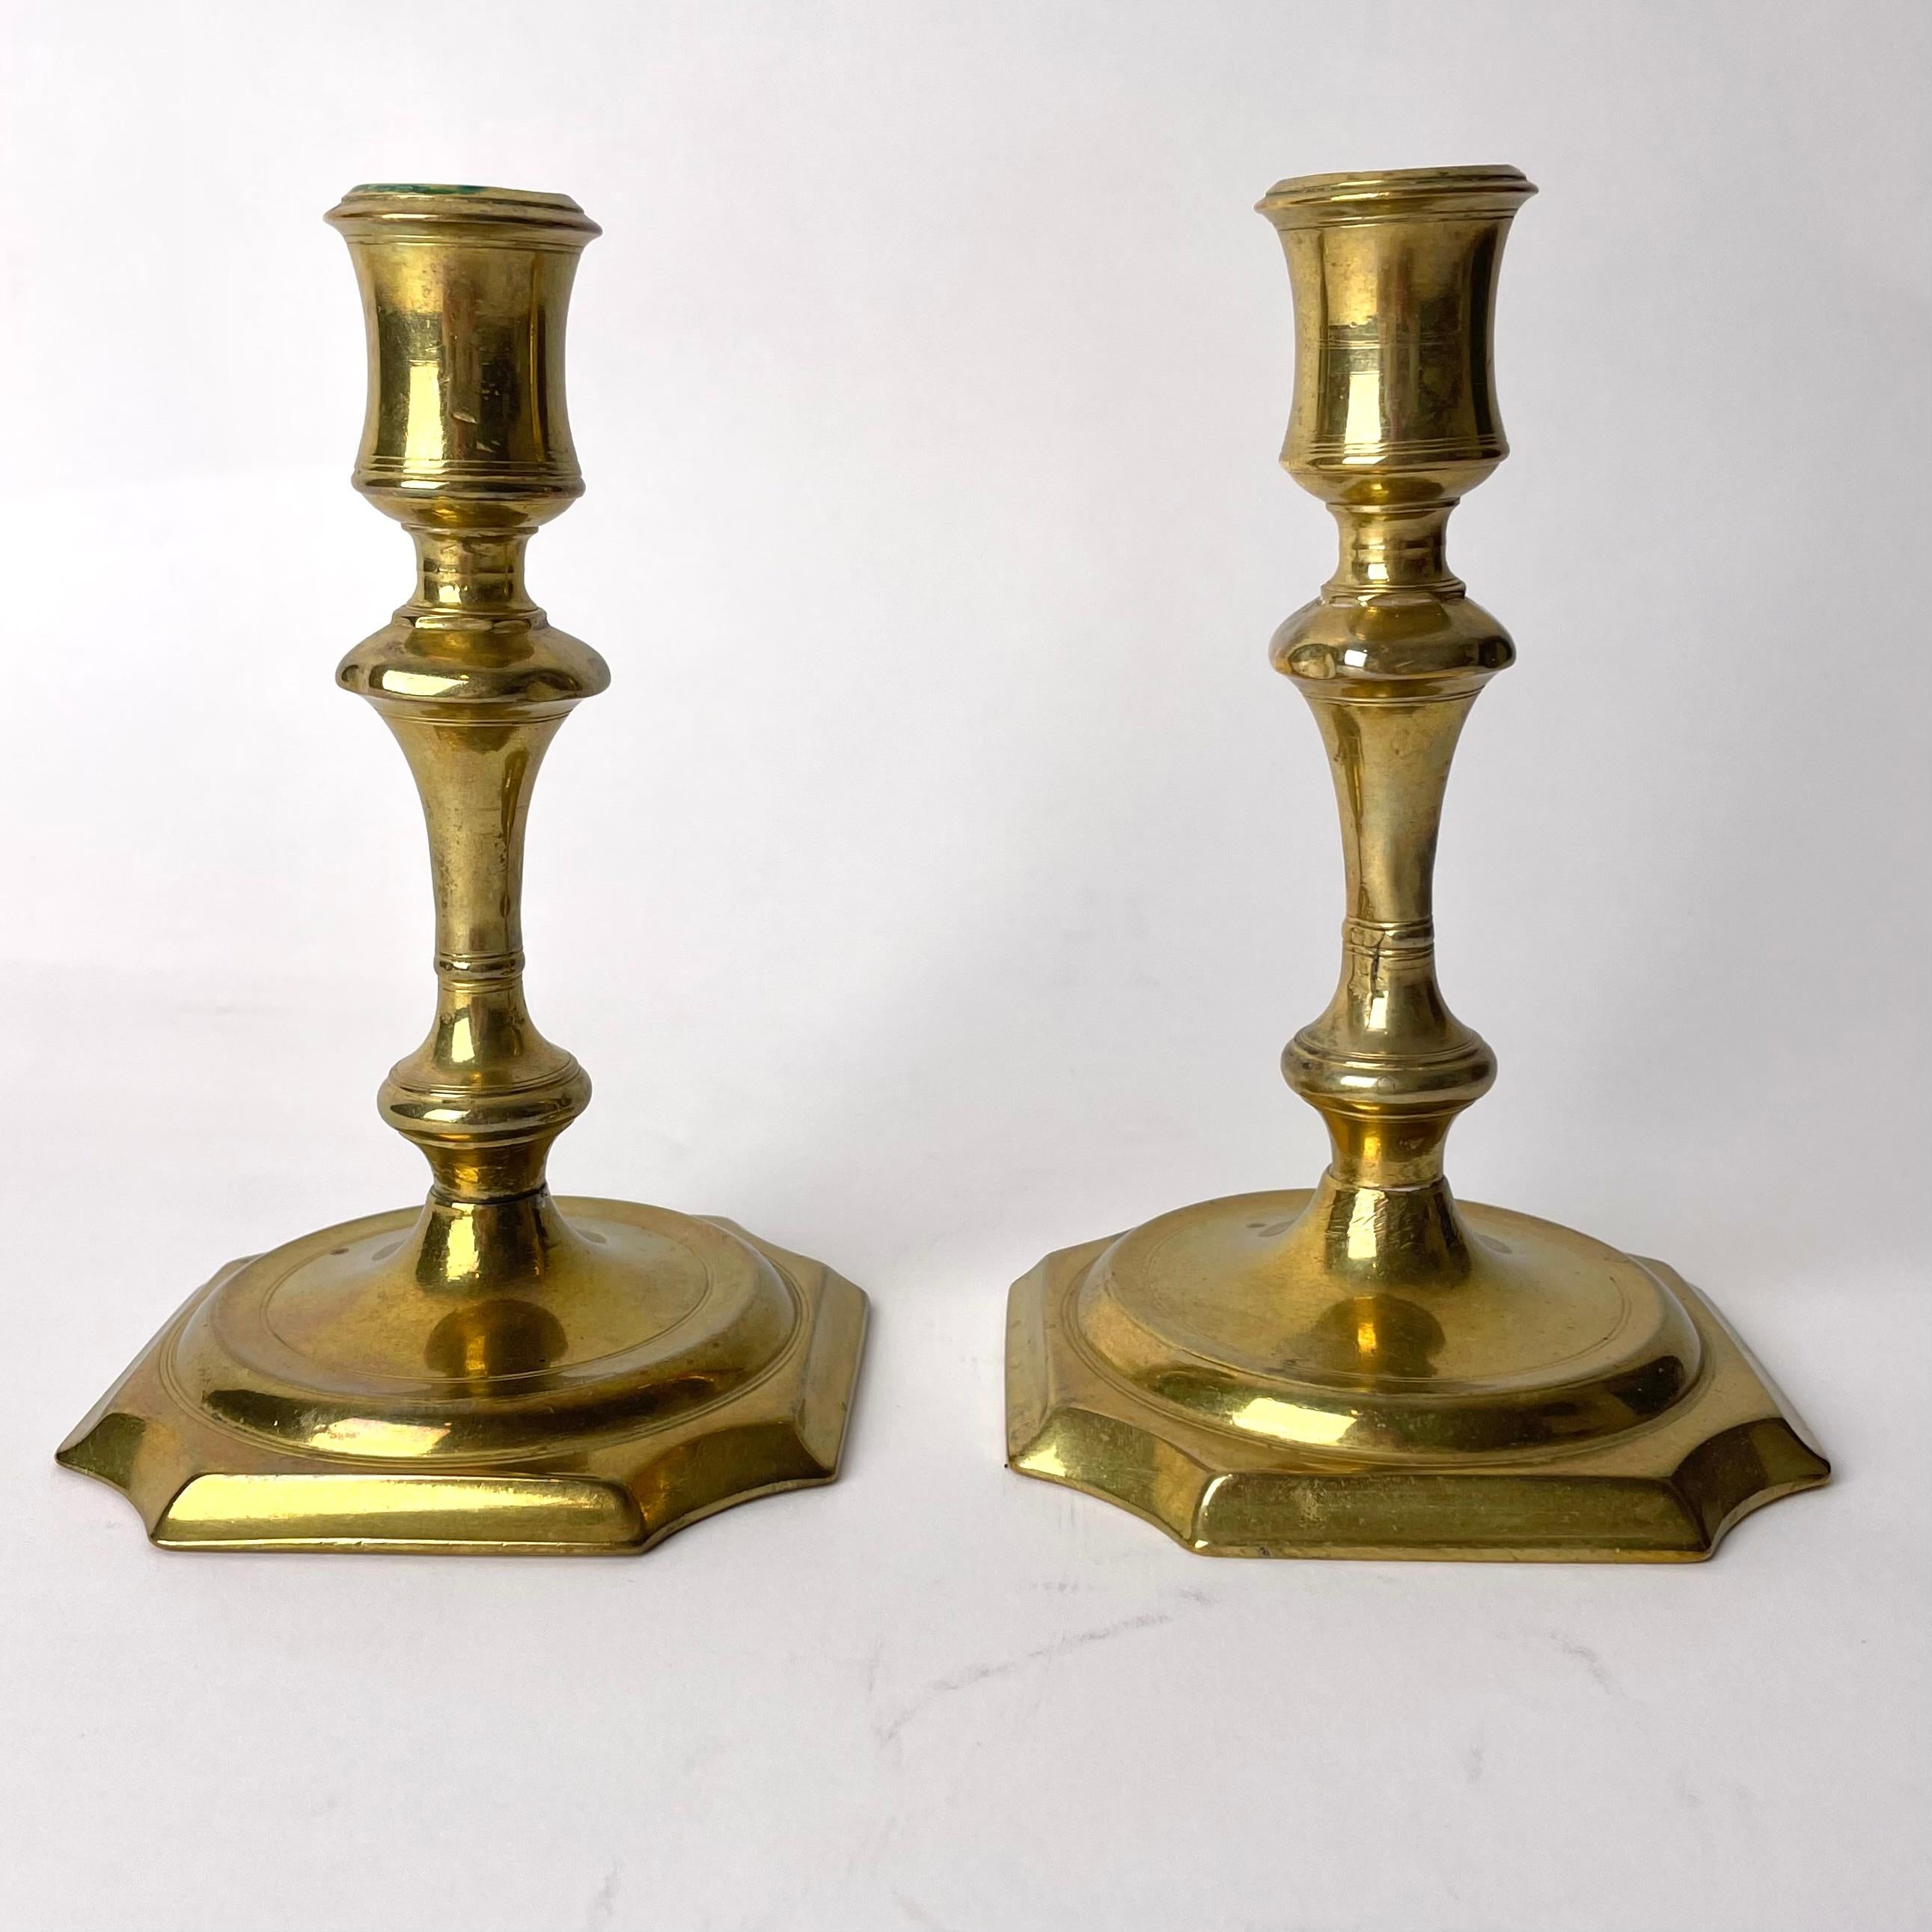 Swedish A Pair of 2 Lovely Brass Candlesticks, Late Baroque, Early 18th Century For Sale